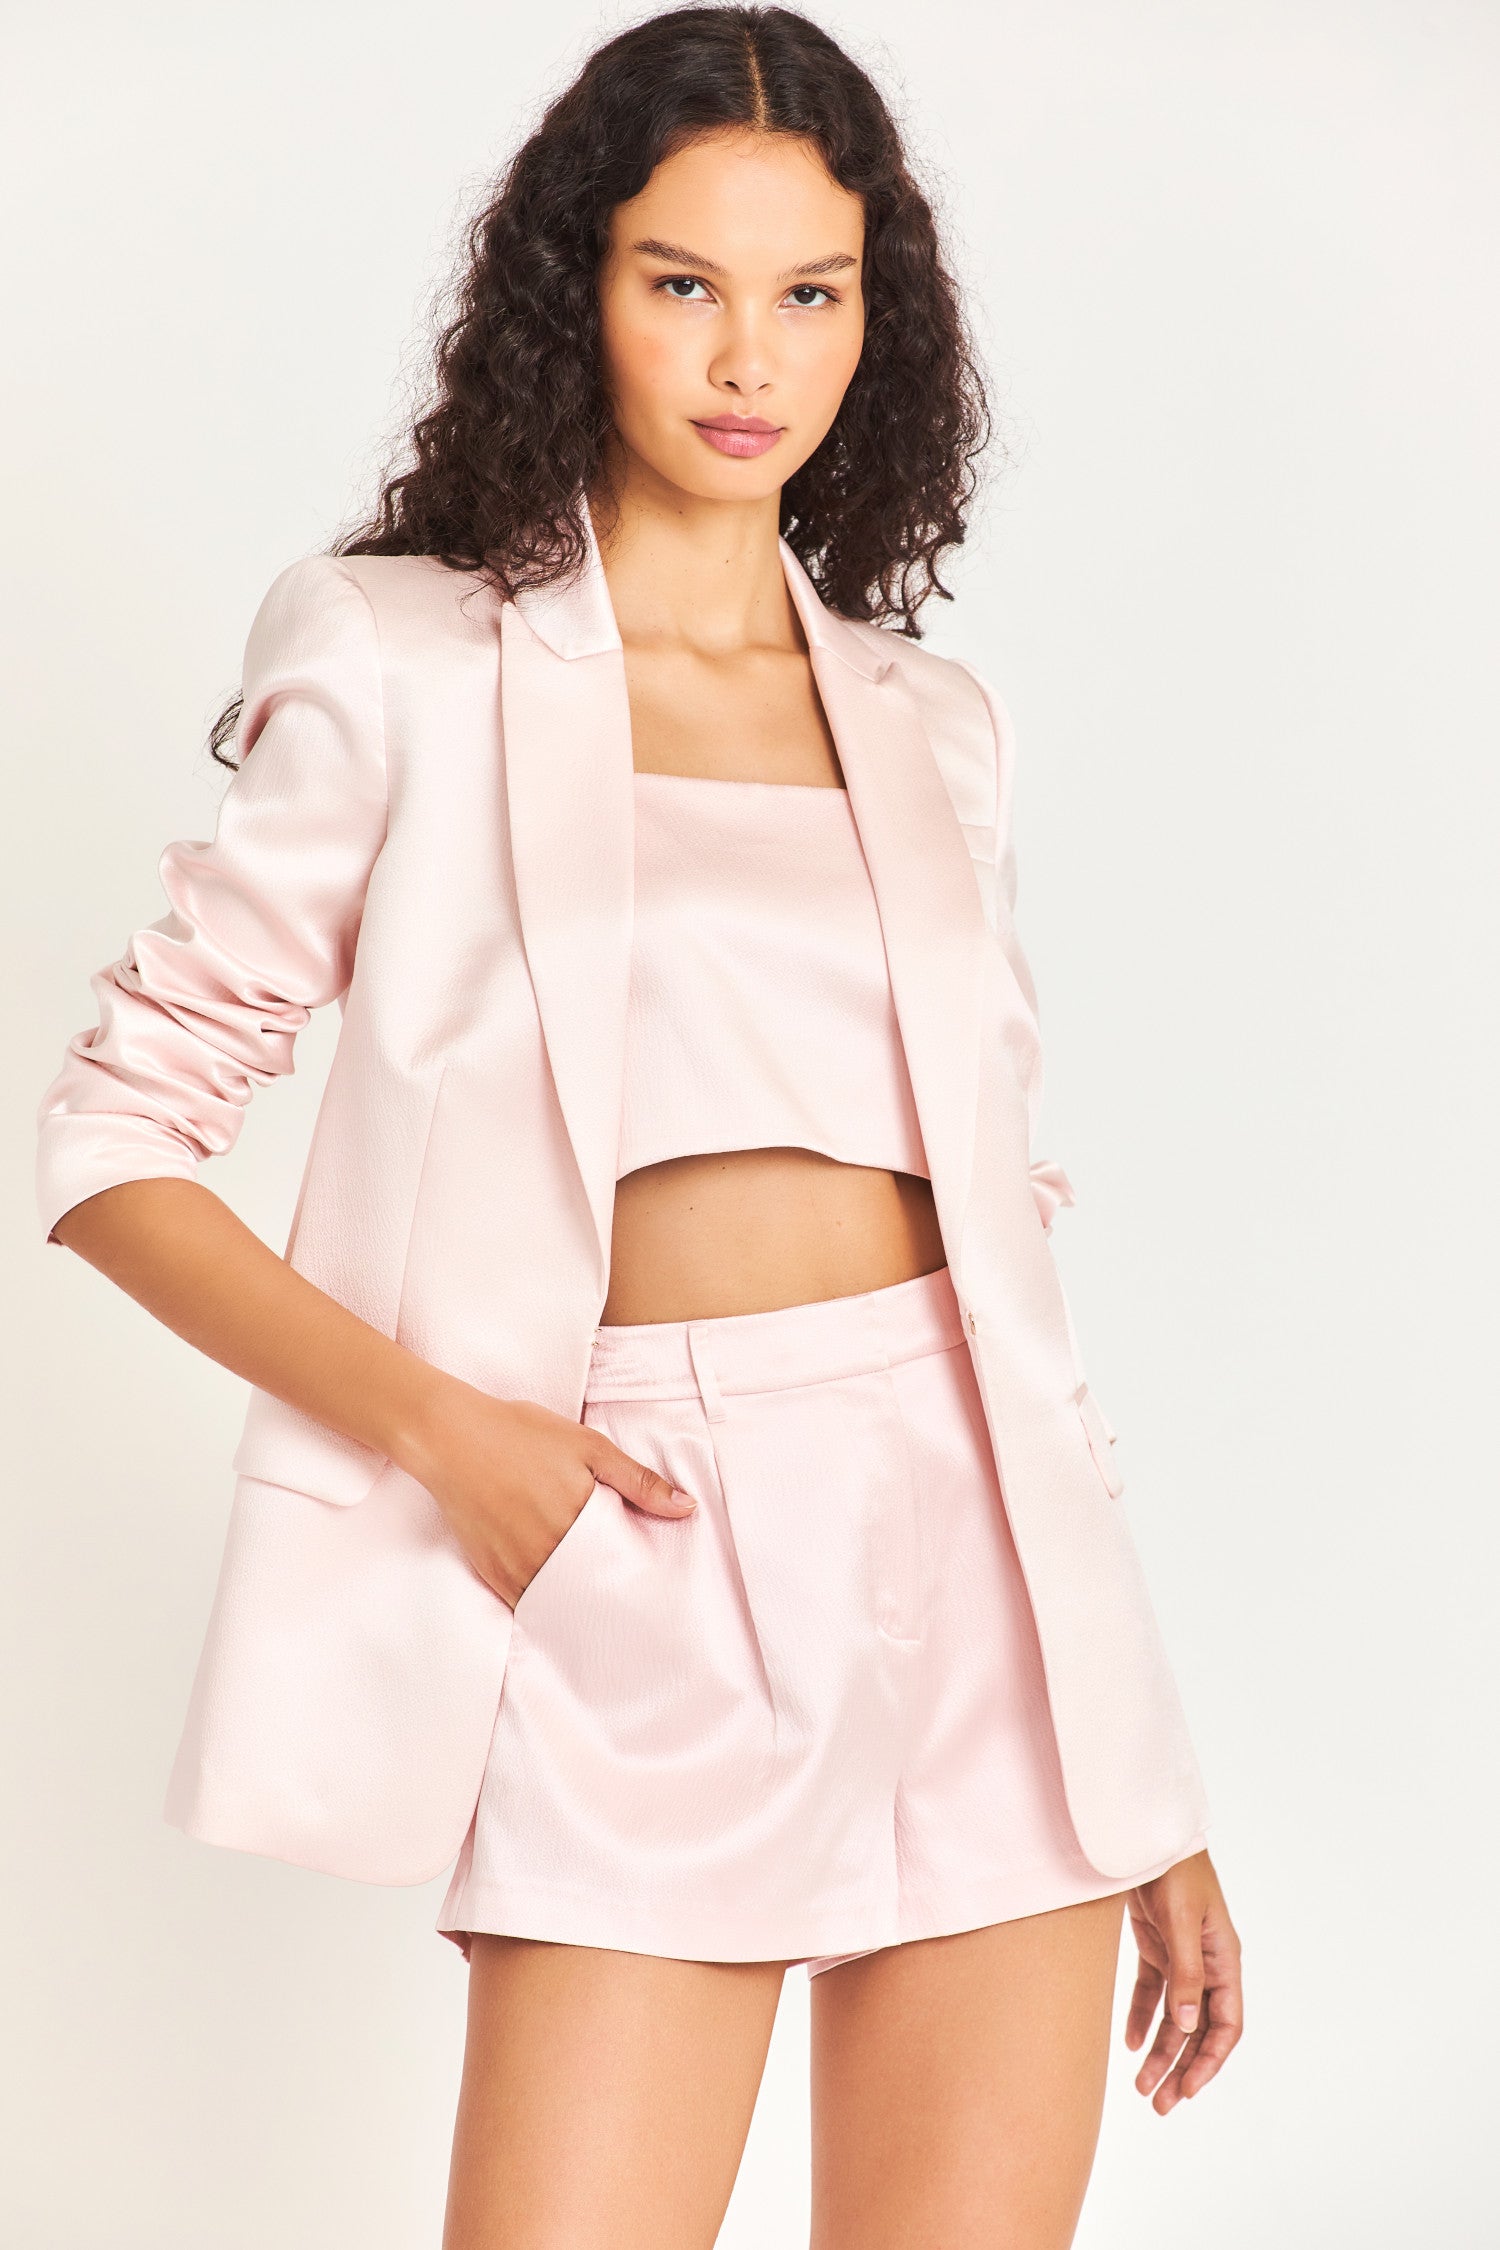 The Gaston Blazer is made of baby pink luxurious silk and has tailoring that gives its structure while featuring a flat pocket, peak lapel, chest pocket, and should pads. 